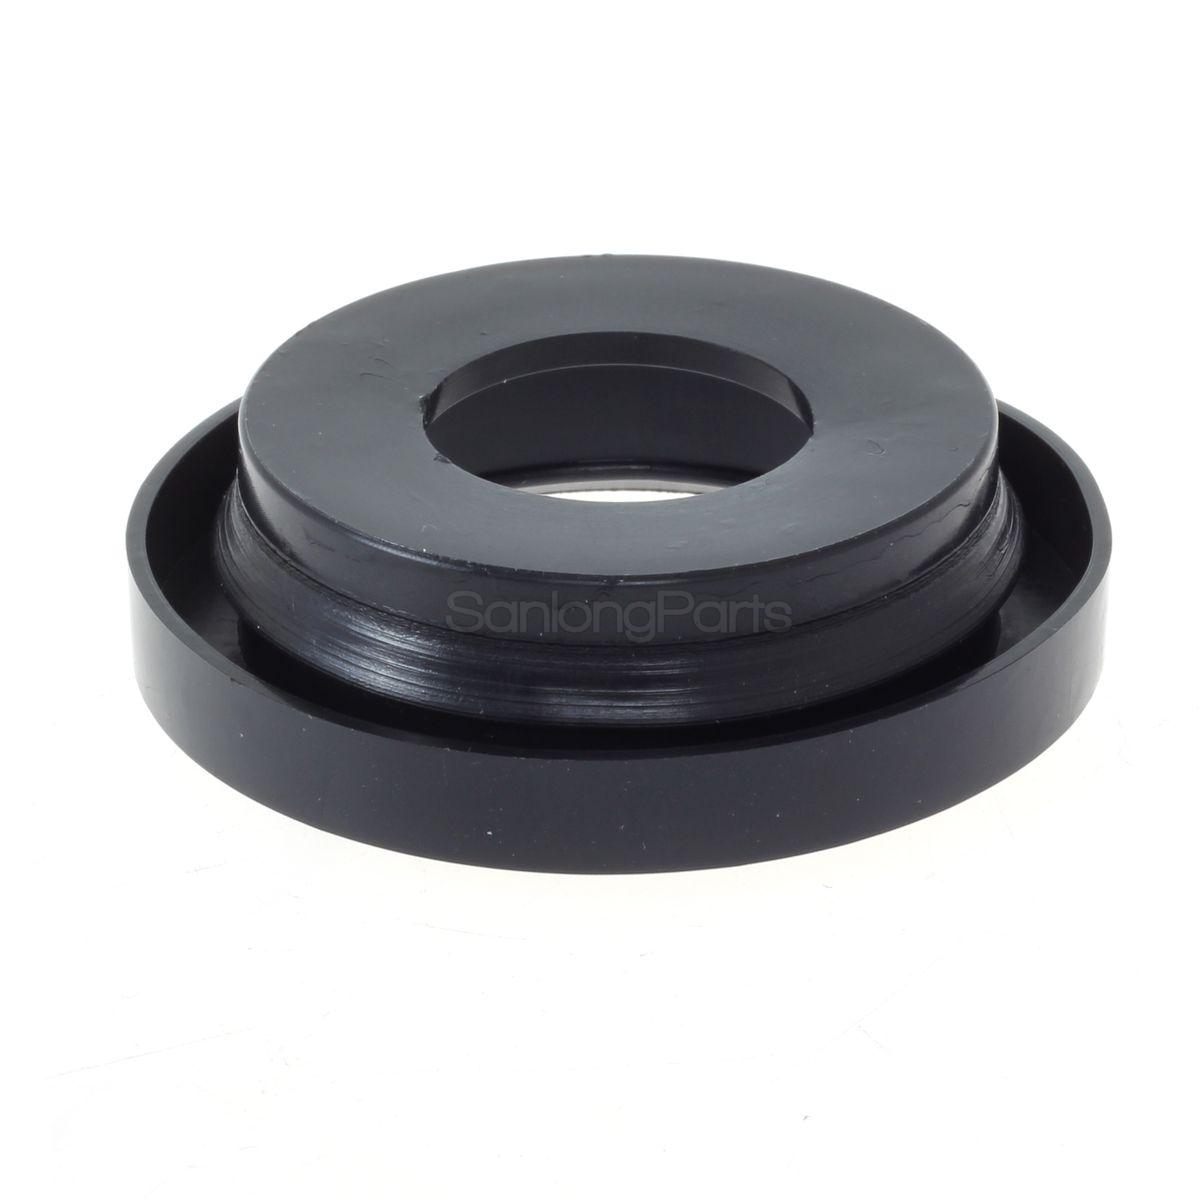 (7) Rubber Grommet for 2" round marker lights w 2 Prong Pigtail Wire Plug eBay